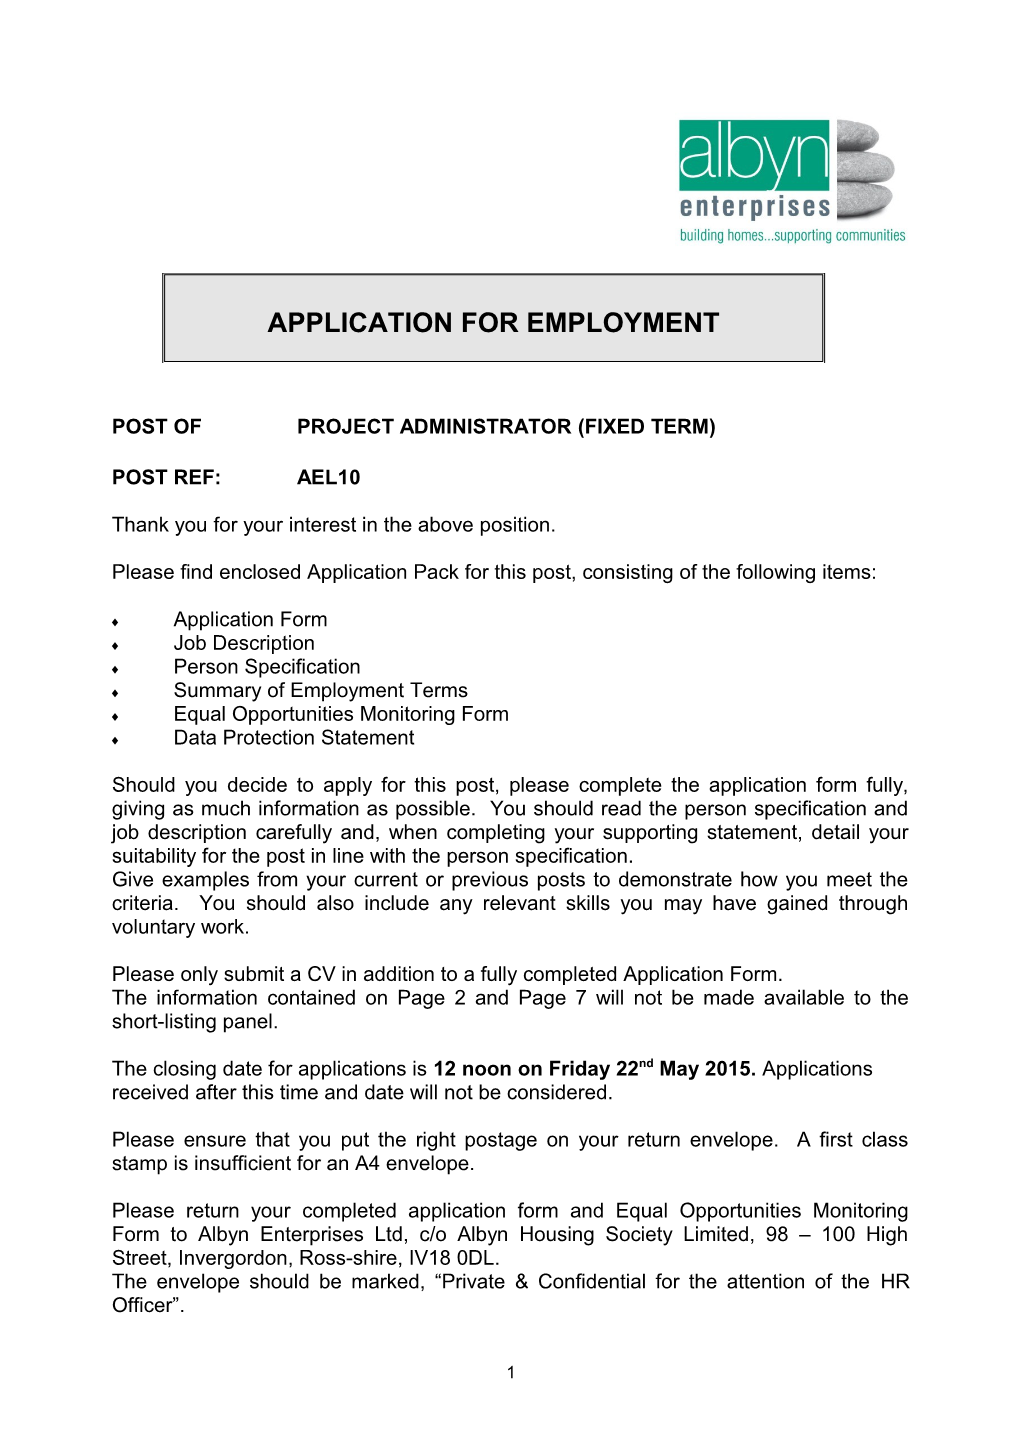 Post of PROJECT ADMINISTRATOR (FIXED TERM)